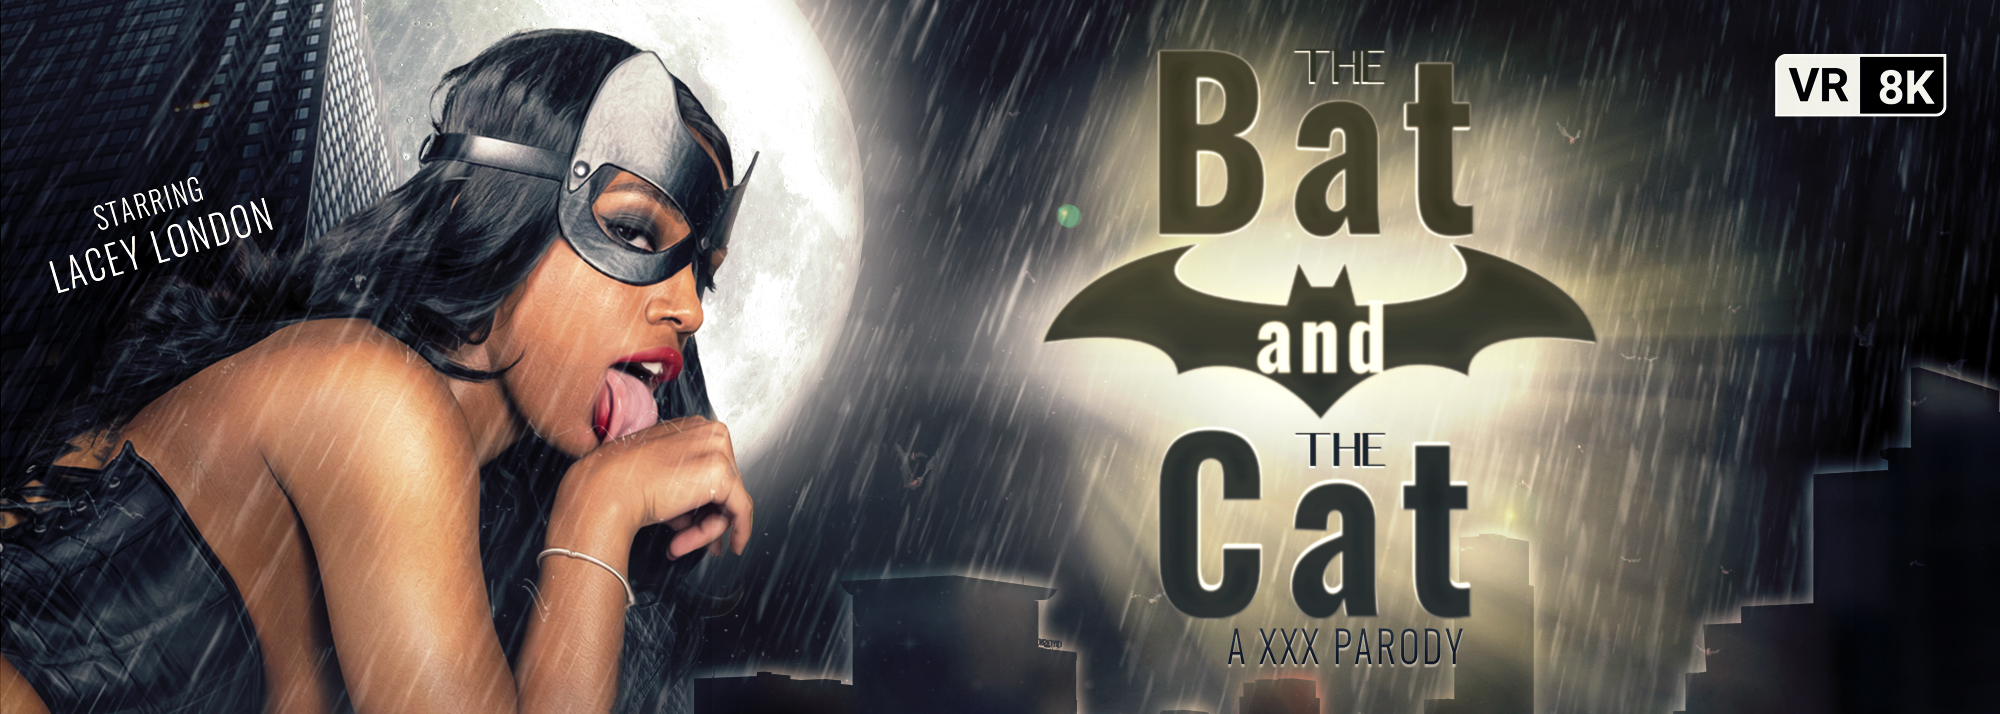 The Bat And The Cat - VR Porn Video, Starring Lacey London VR